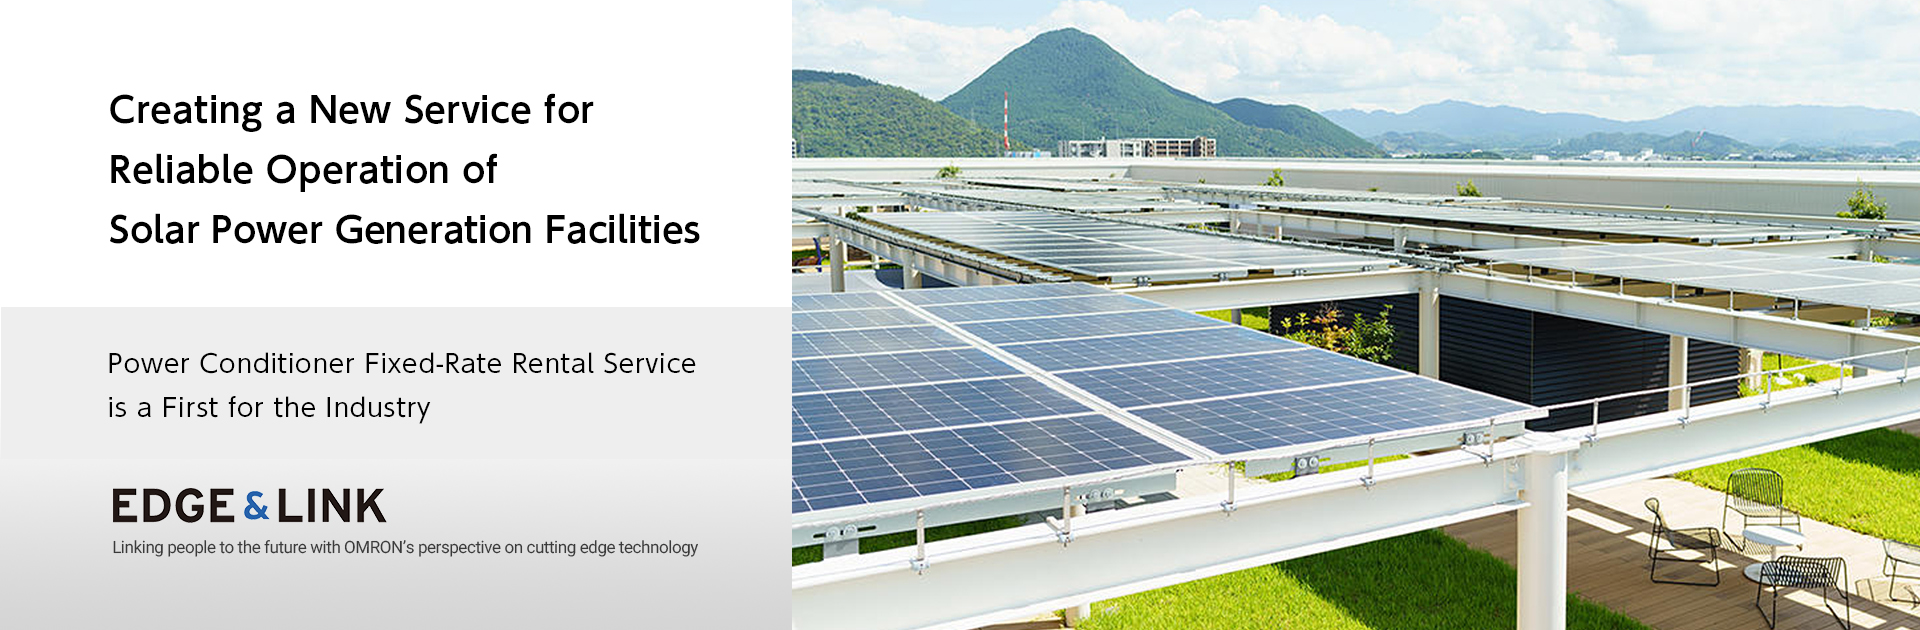 Creating a New Service for Reliable Operation of Solar Power Generation Facilities